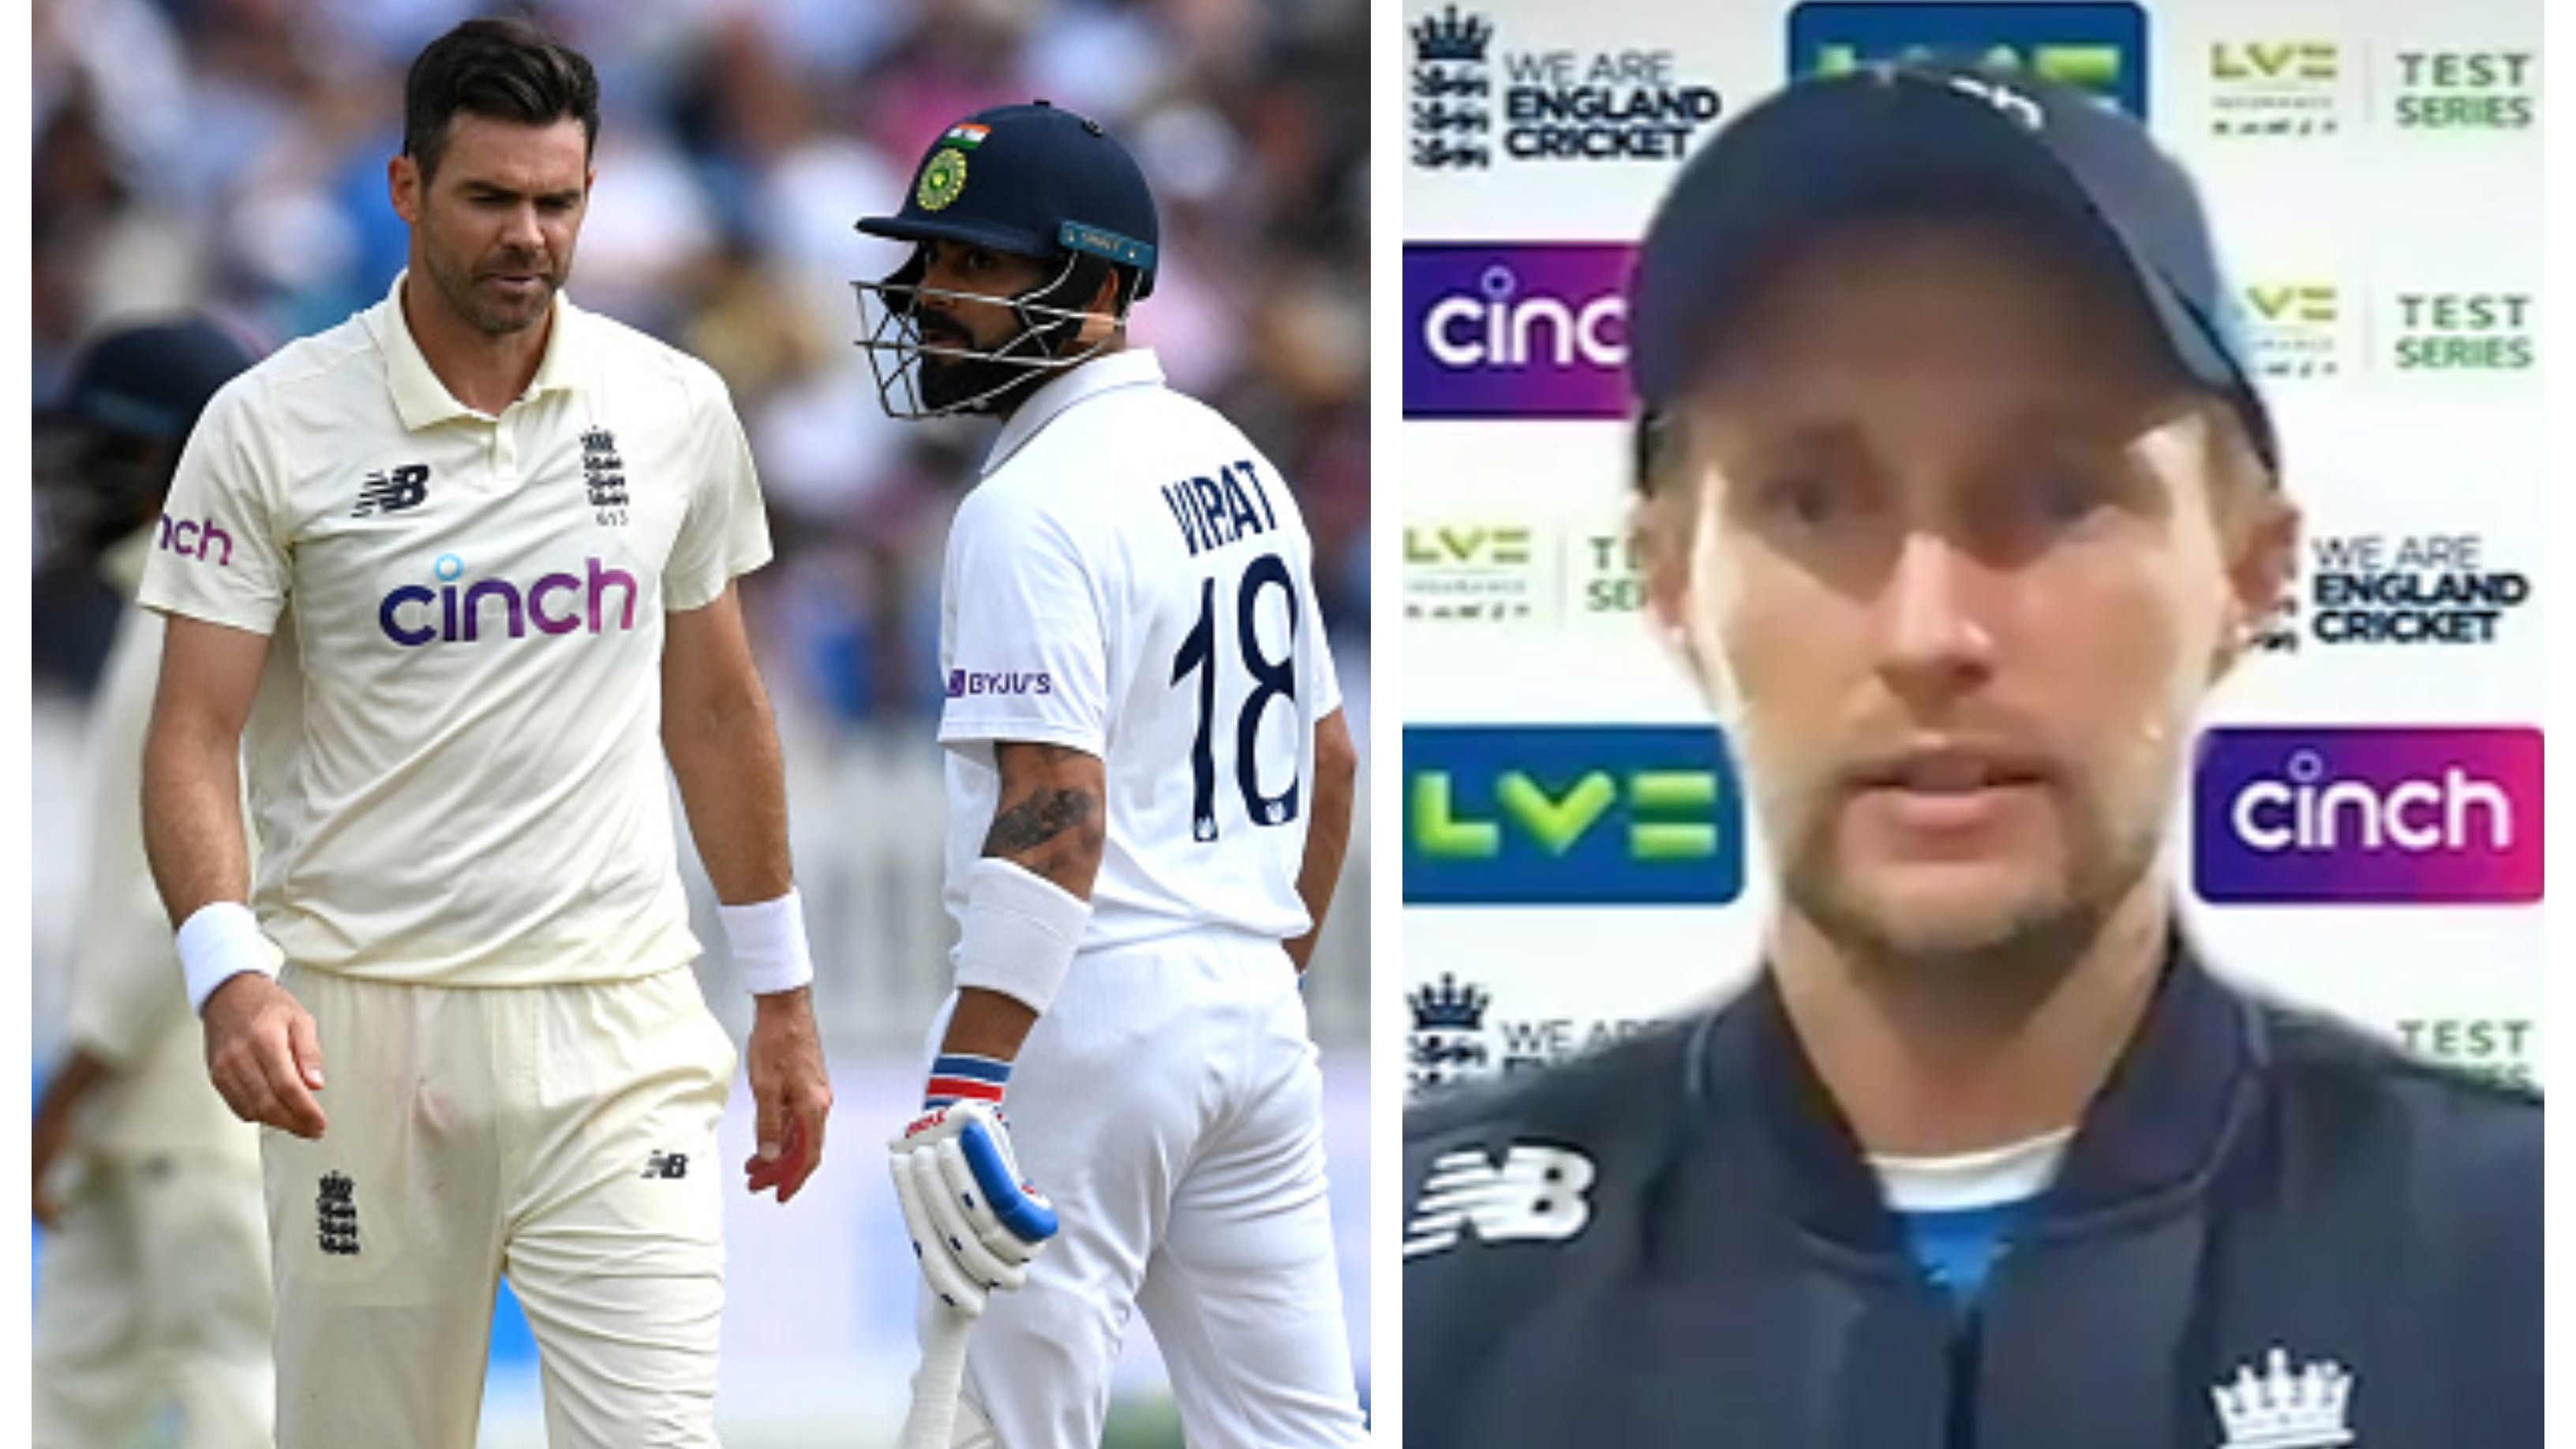 ENG v IND 2021: Joe Root says England won’t be drawn into conversations needlessly during third Test